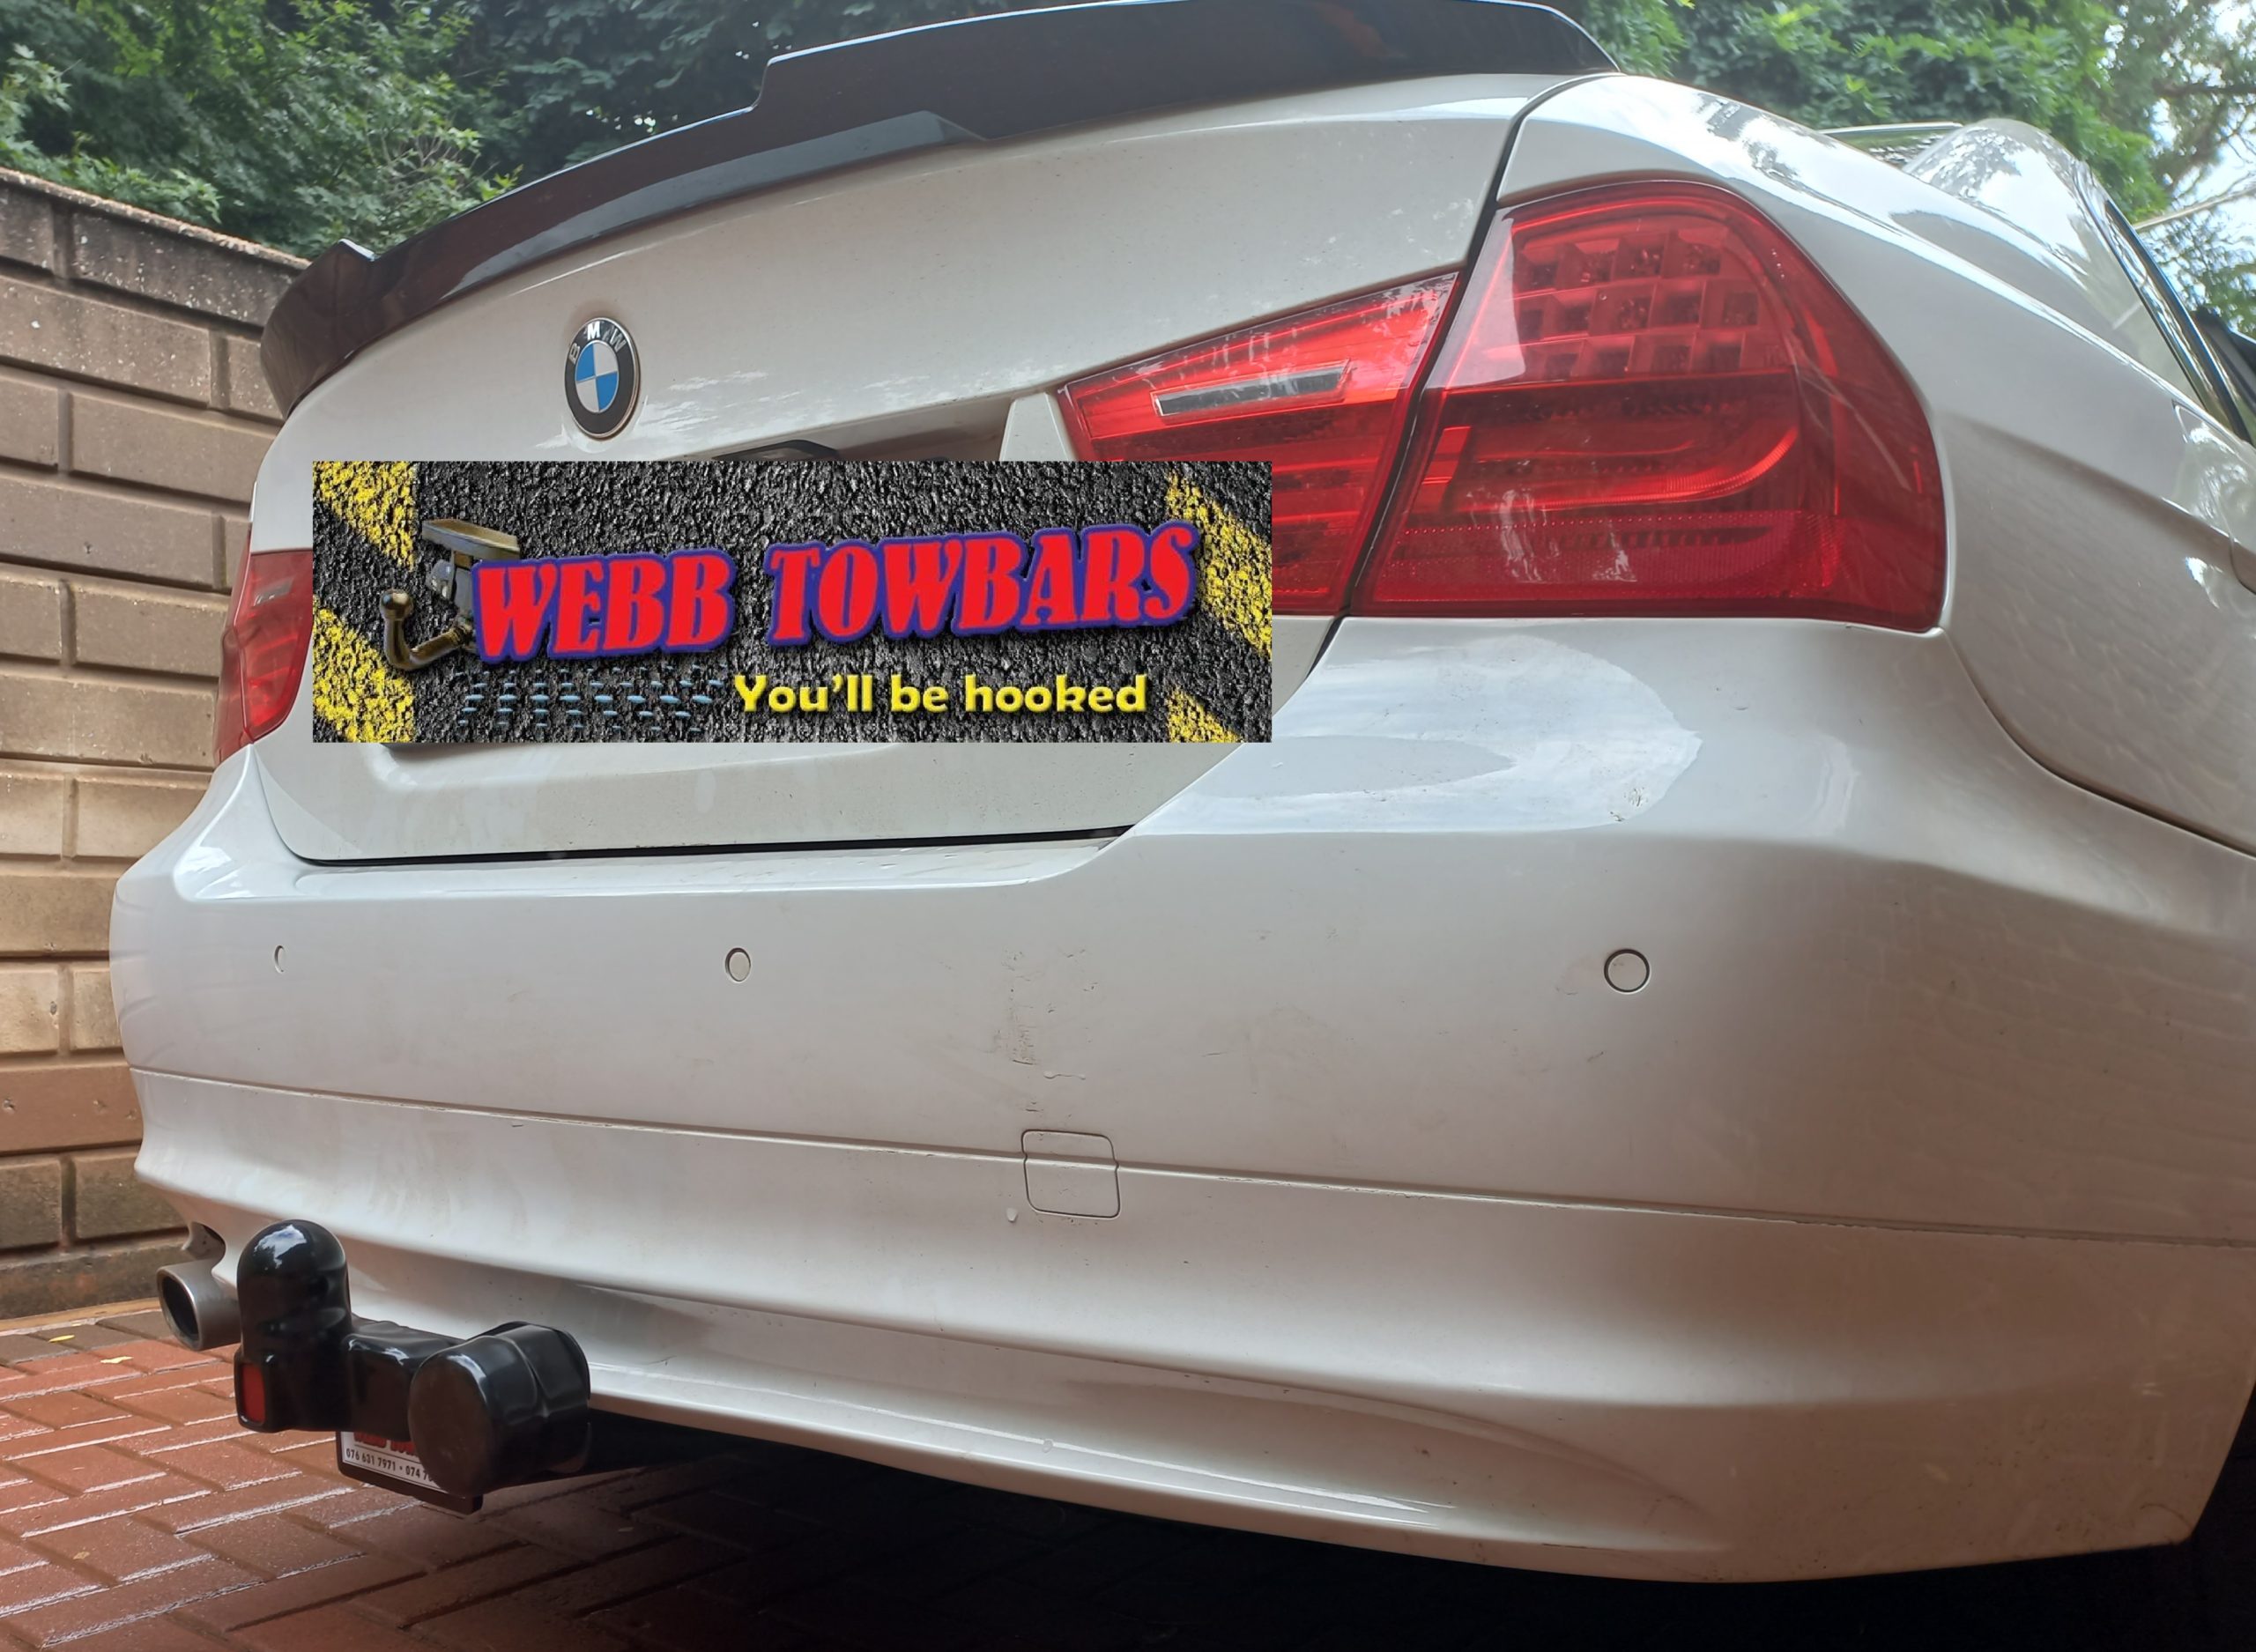 Professional installation from Webb Towbars Fitment Centre on a BMW E90 in Gauteng, South Africa.